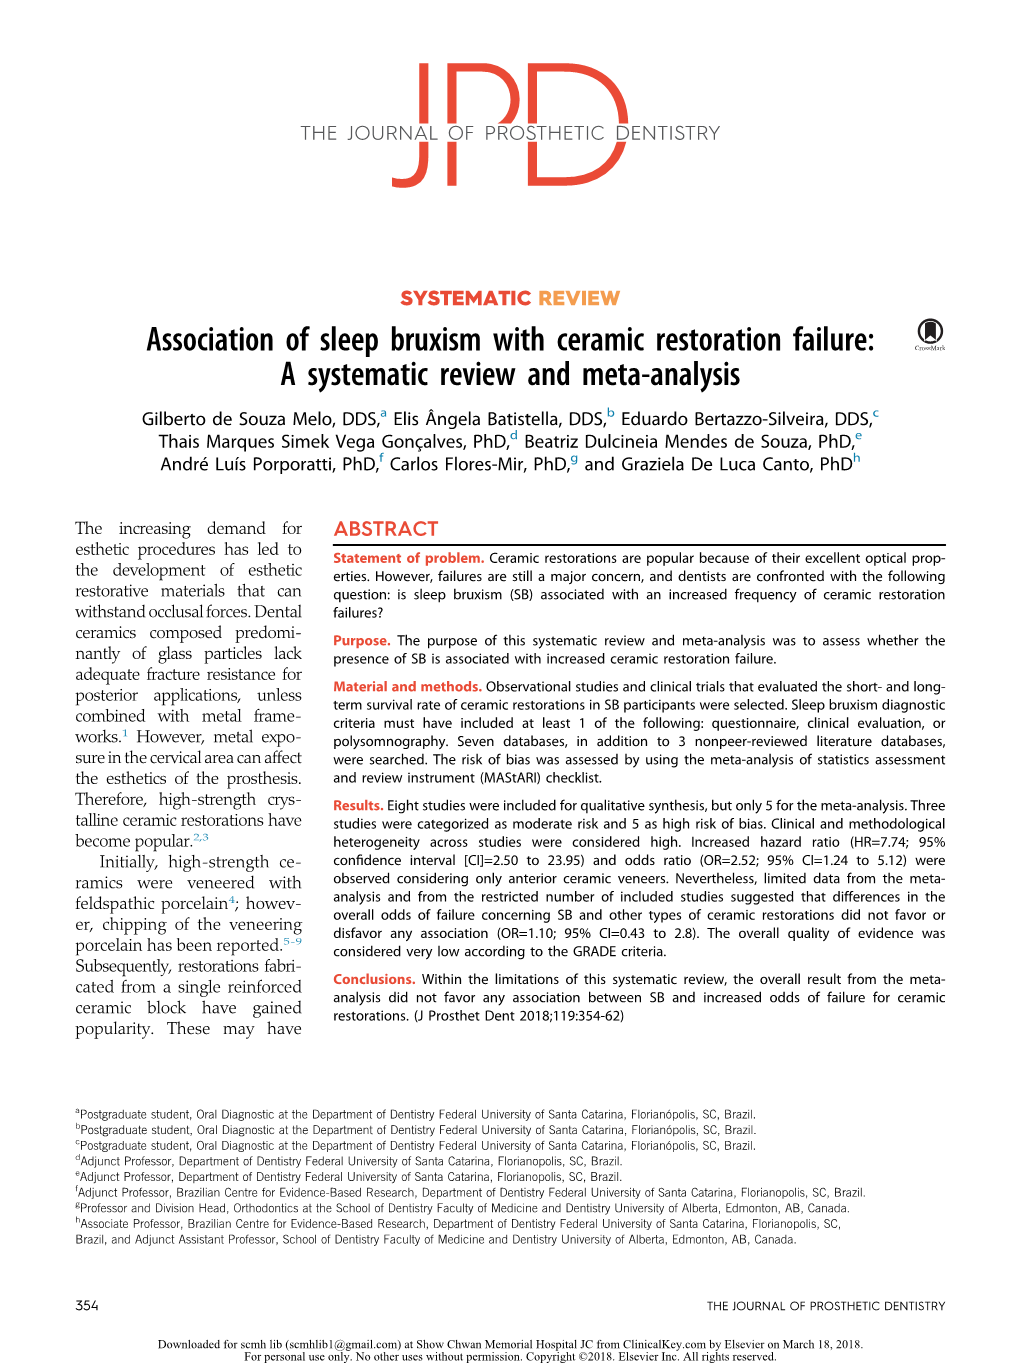 Association of Sleep Bruxism with Ceramic Restoration Failure: a Systematic Review and Meta-Analysis